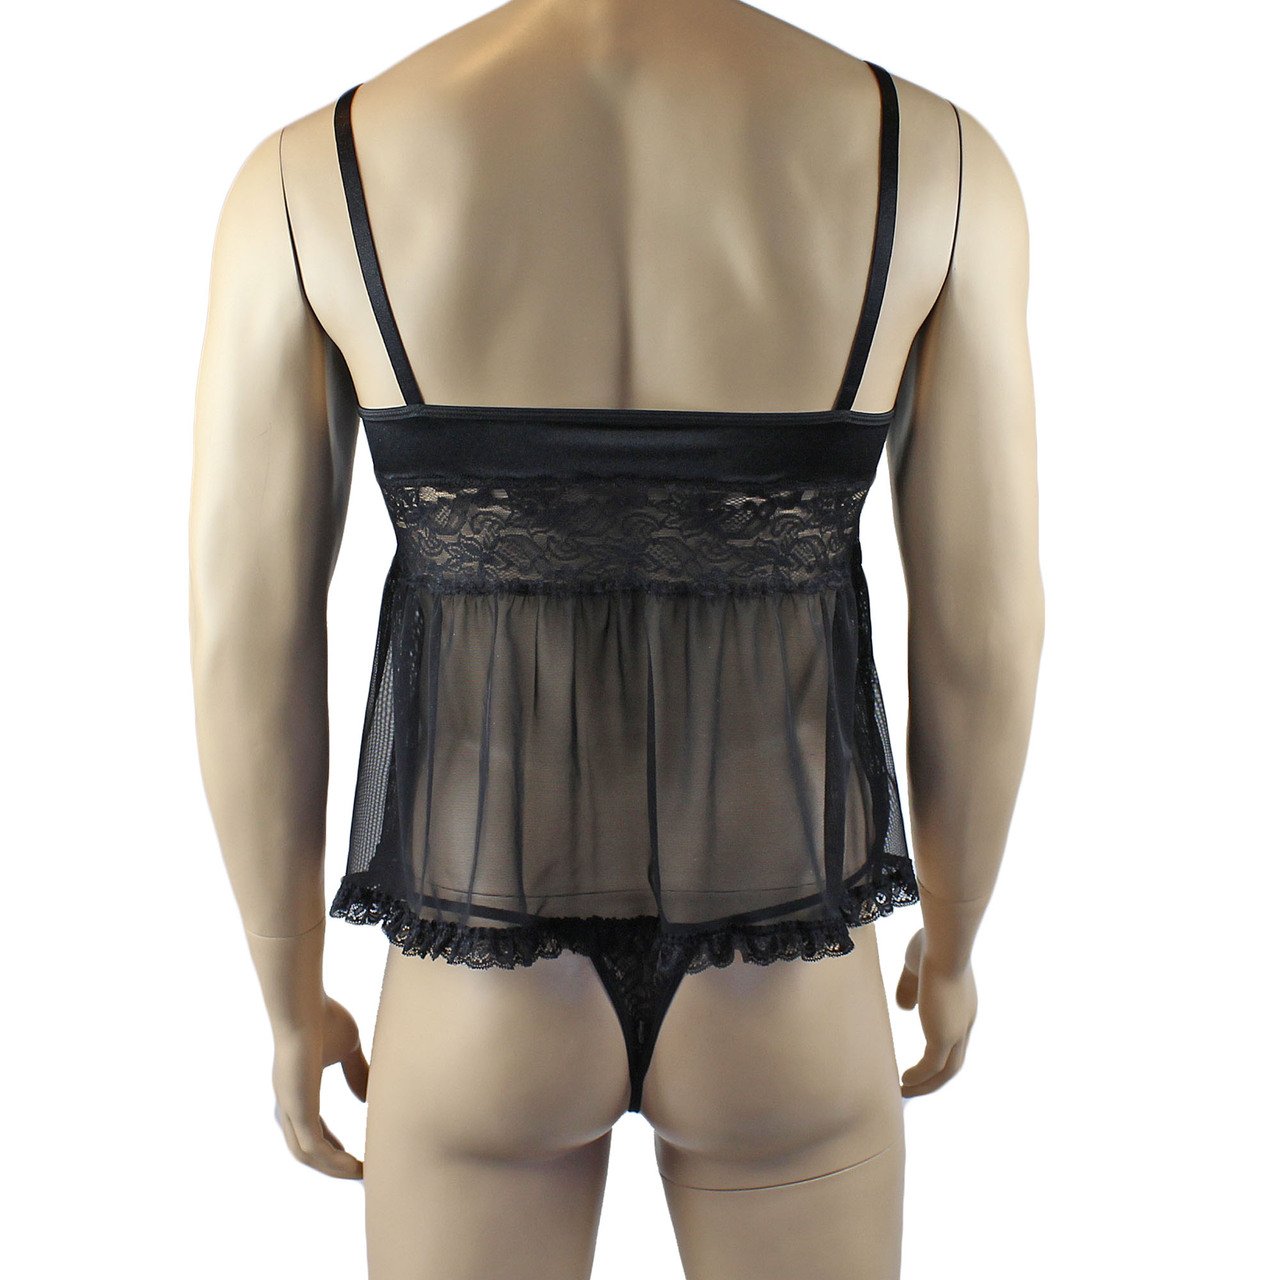 Mens Joanne Mini Babydoll Camisole & G string - Sizes up to 3XL (lblack plus other colours)